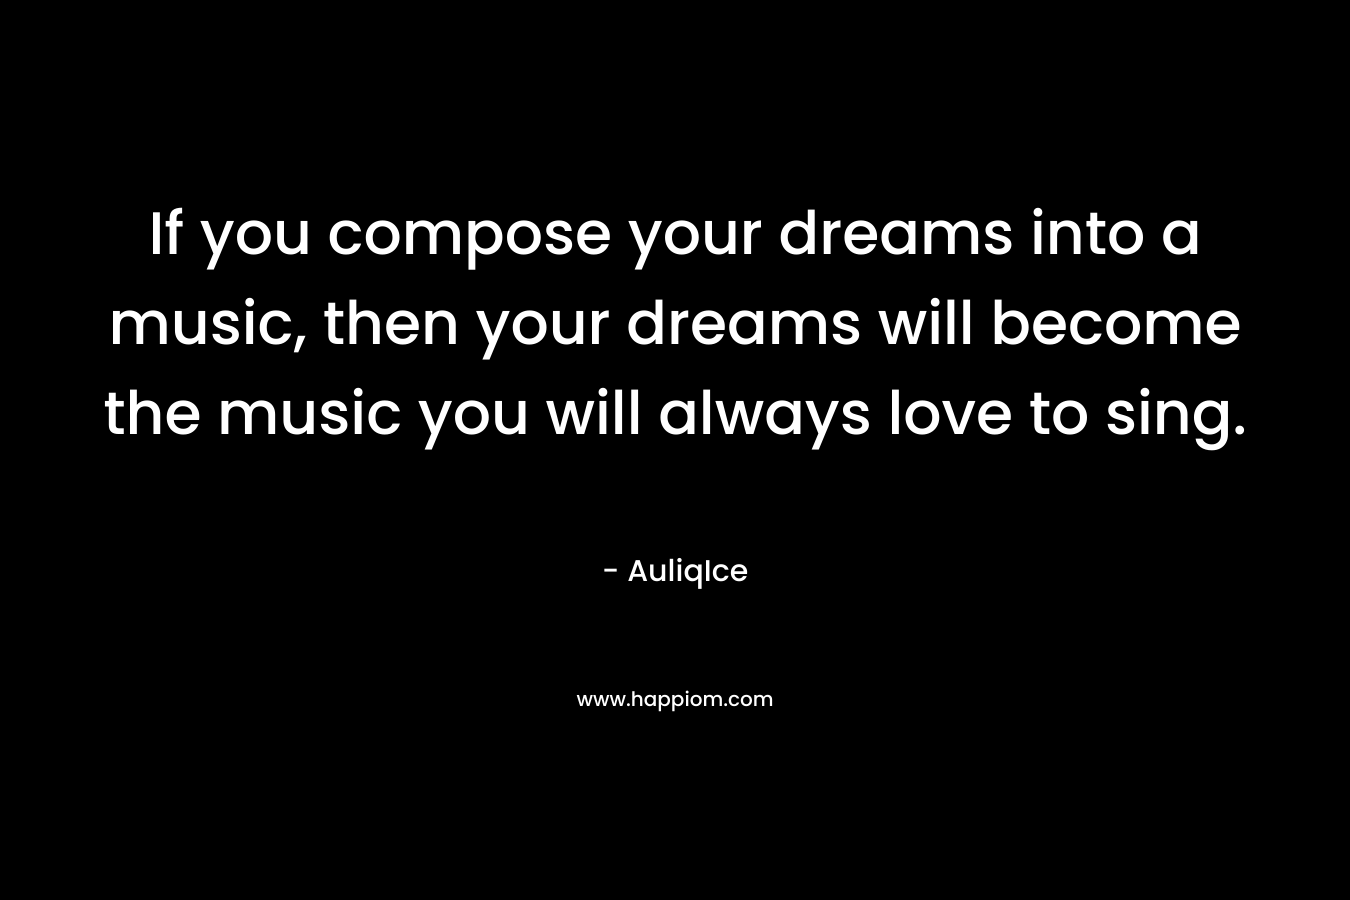 If you compose your dreams into a music, then your dreams will become the music you will always love to sing. – AuliqIce